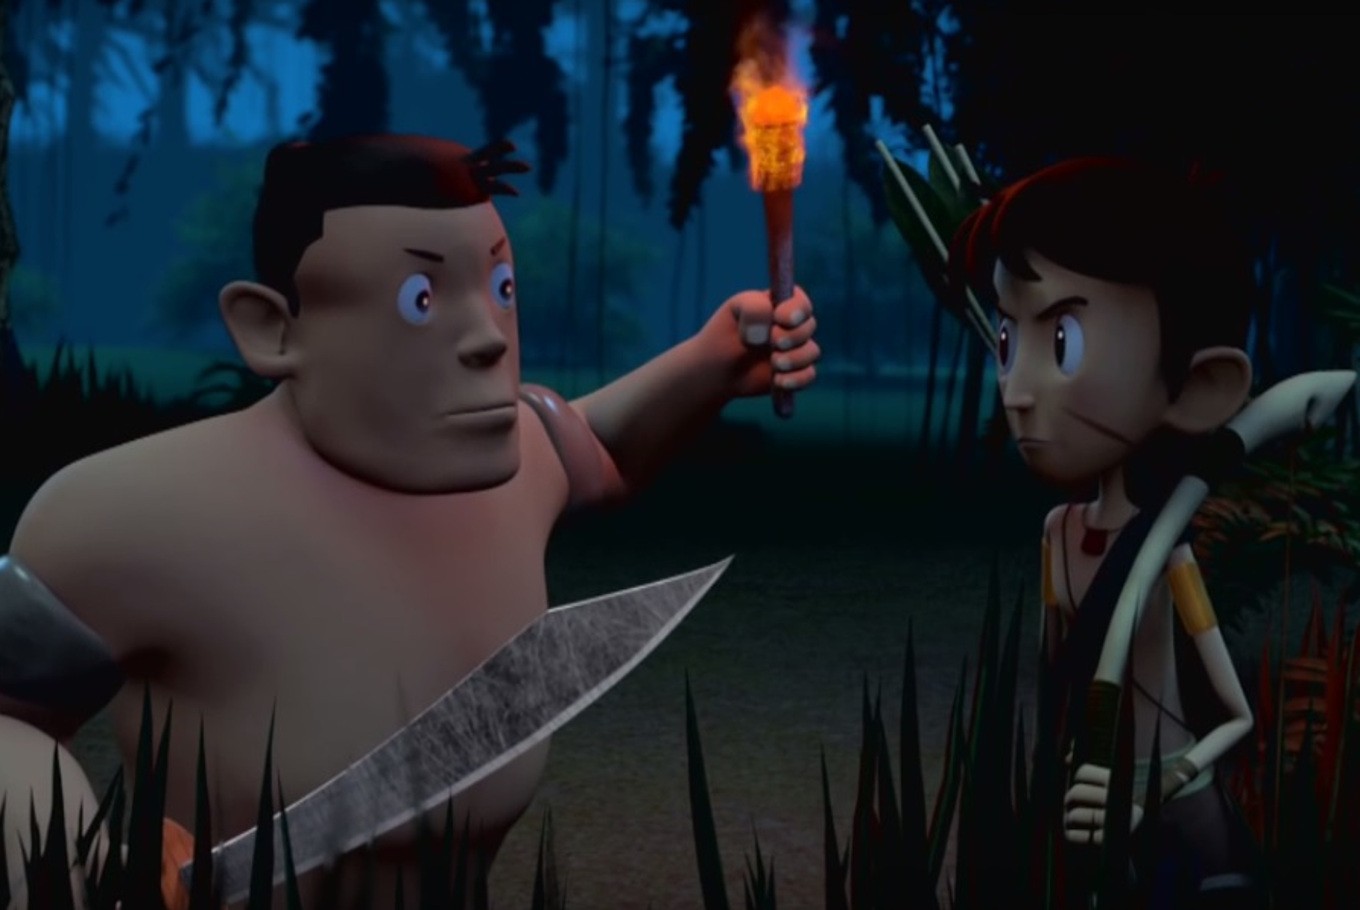 Student-made animated film attracts production houses